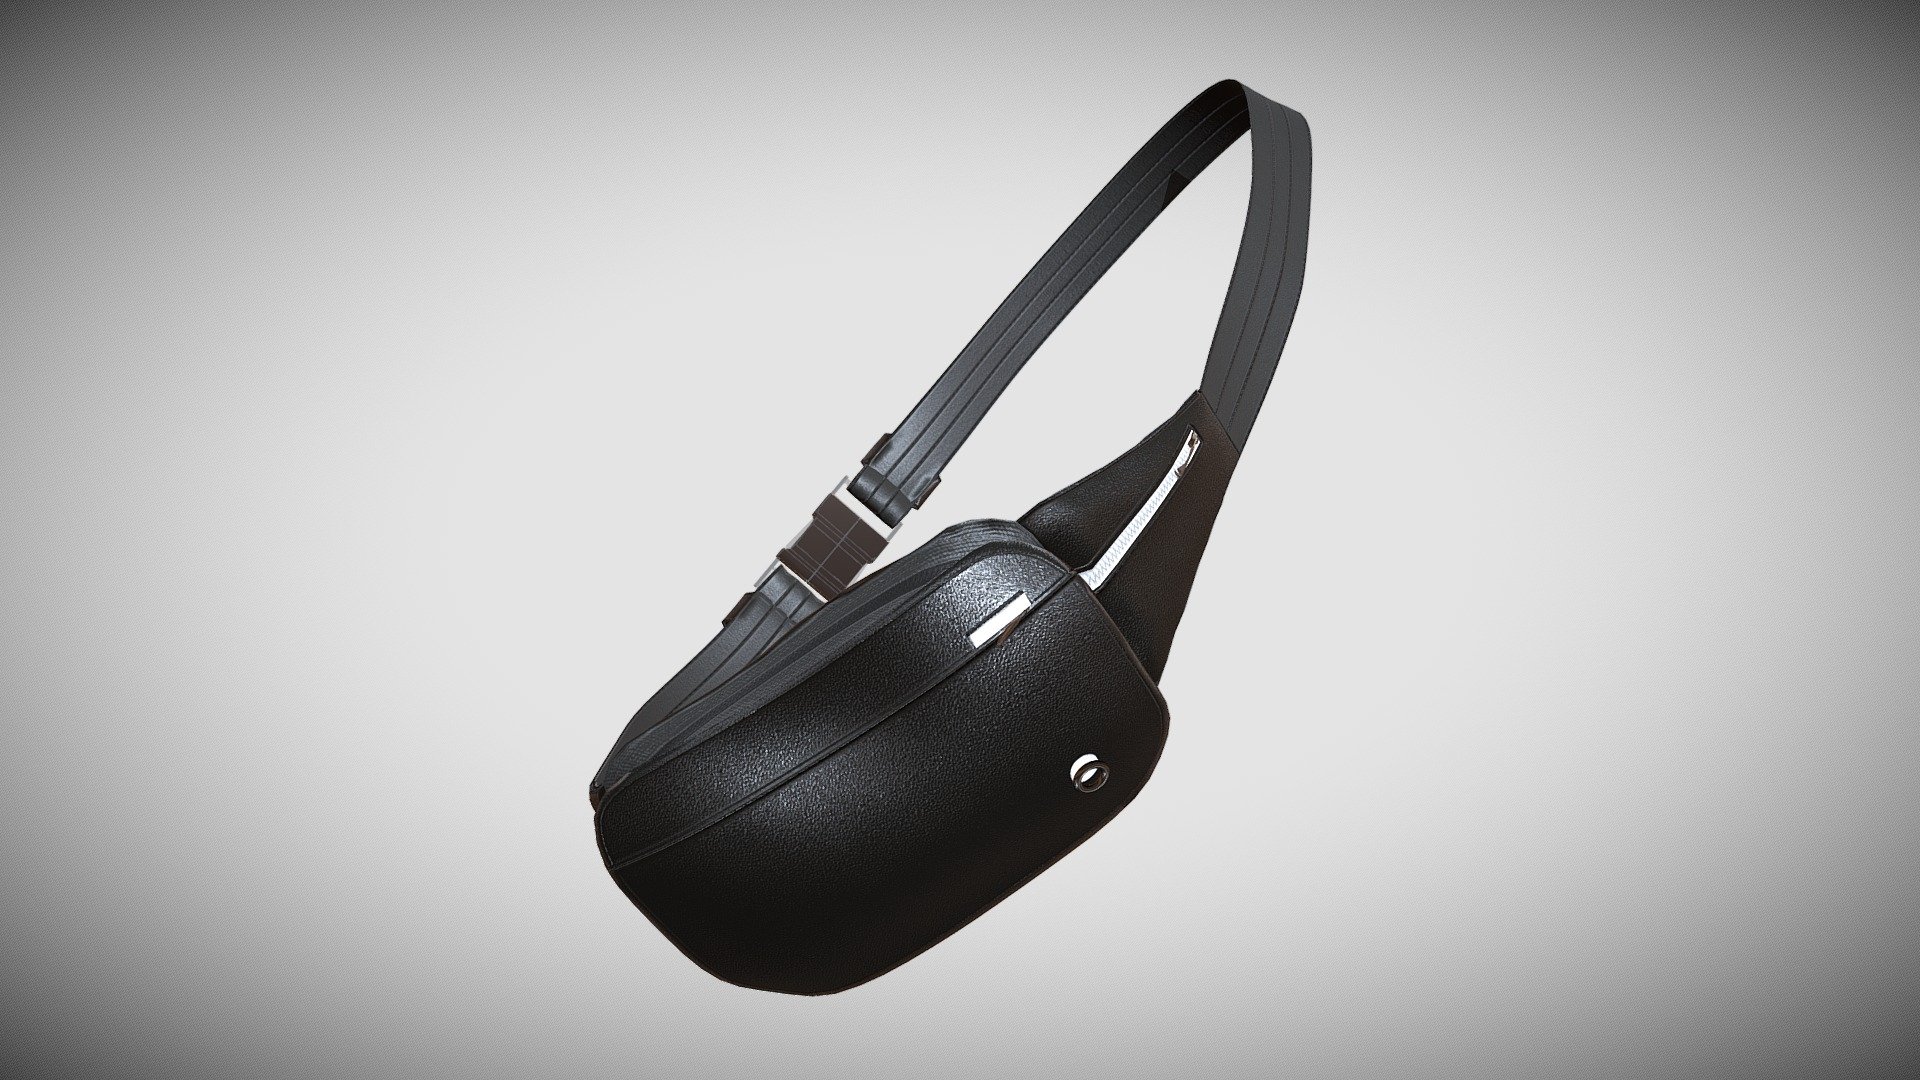 Black Side Bag

I am a Professional 3D Fashion/Apprel Designer. I have 7 years working experience about 3D Fashion. I am working with Clo3d, Marvelous Designer (MD), Daz3d, Blender, Cinema4d, Etc.

Features:
1.  2k UV Texture
2.  Triangle mesh
3.  Textures with Non-overlapping UV Map (2048x2048 Pixels)
4.  In additonal Textures folder have diffuse,displacement,metalness,normal,opacity,roughness maps.

Attachment Fils:
Exported Files (All are exported in DAZ Studio scale)
* OBJ
* FBX
* Marvelous Designer/Clo3d file (zprj)

Thanks 3d model